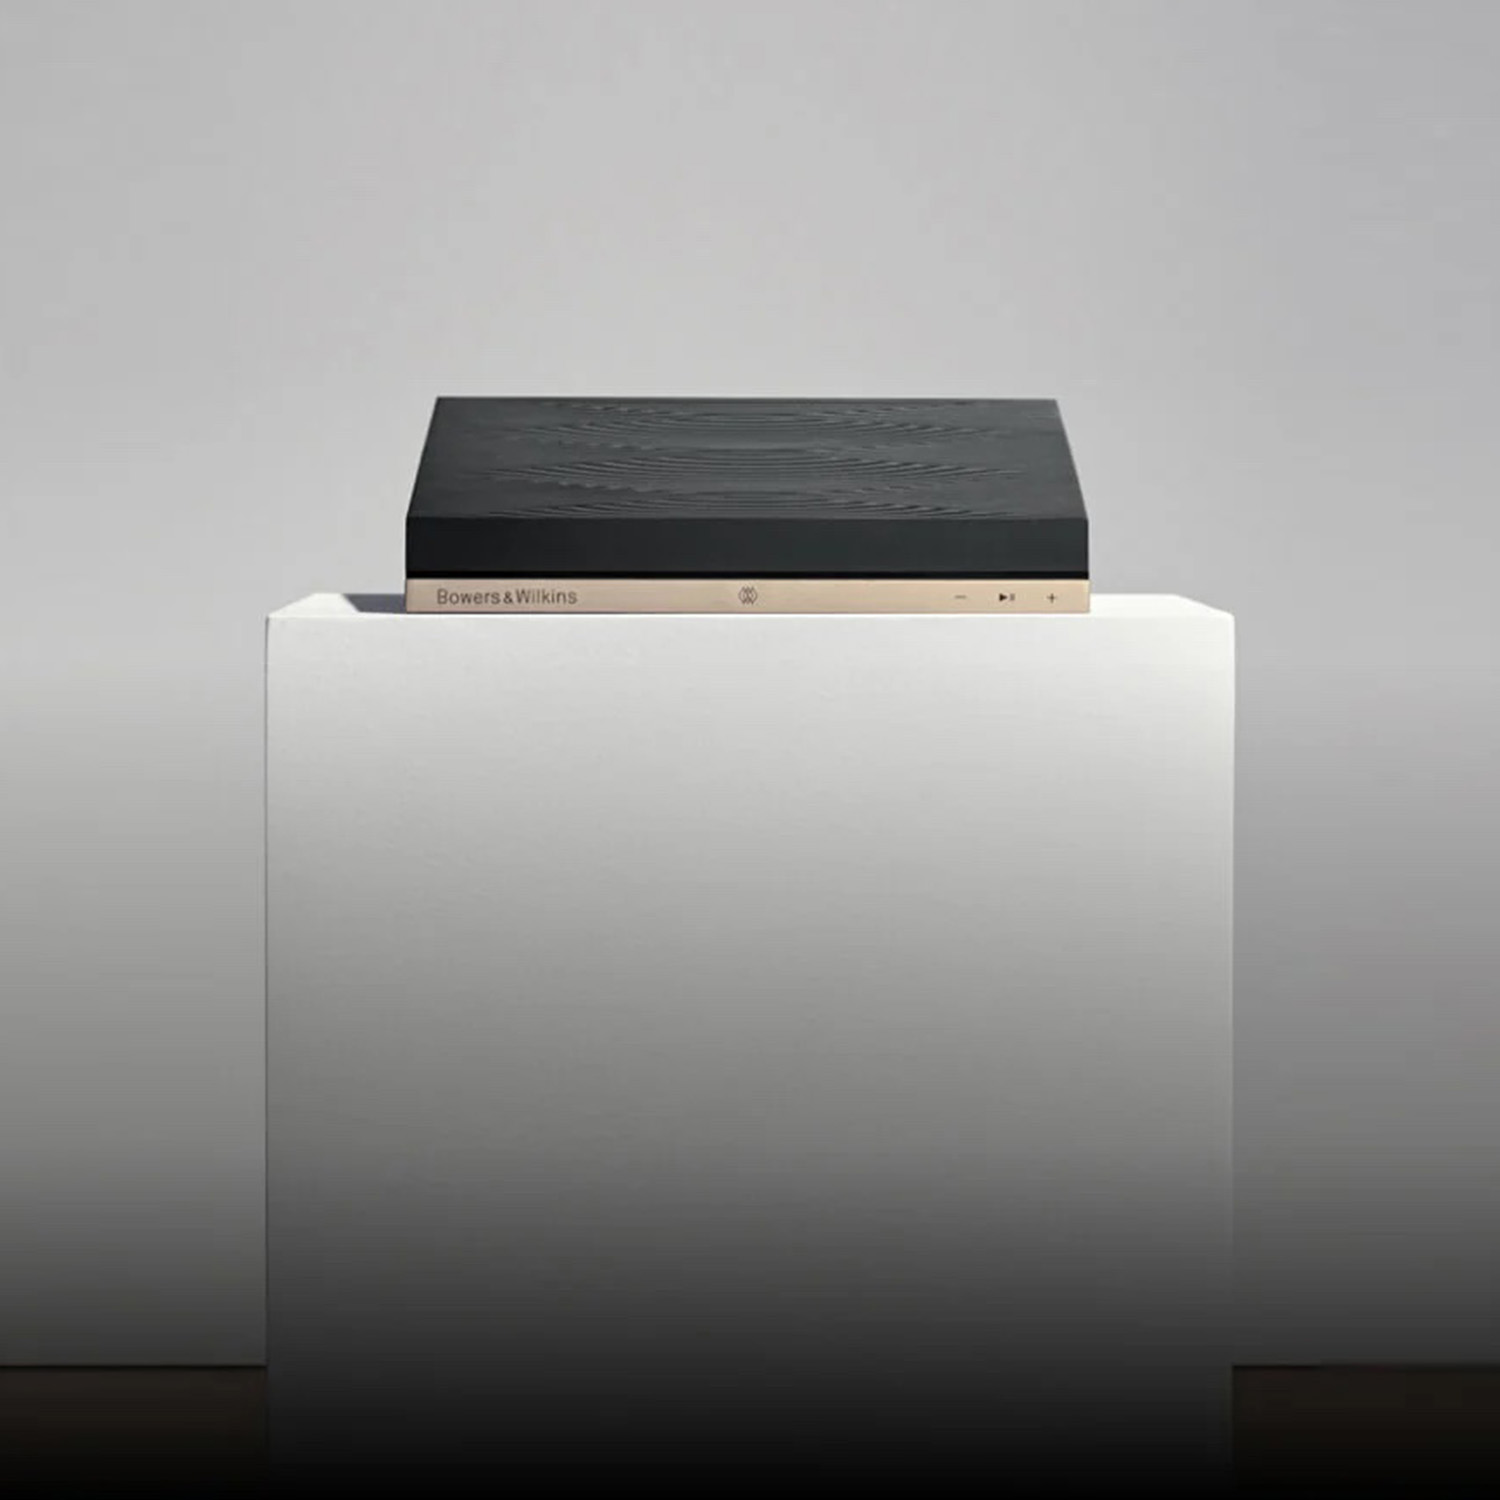 Formation Audio - Give your hi-fi a whole new dimension